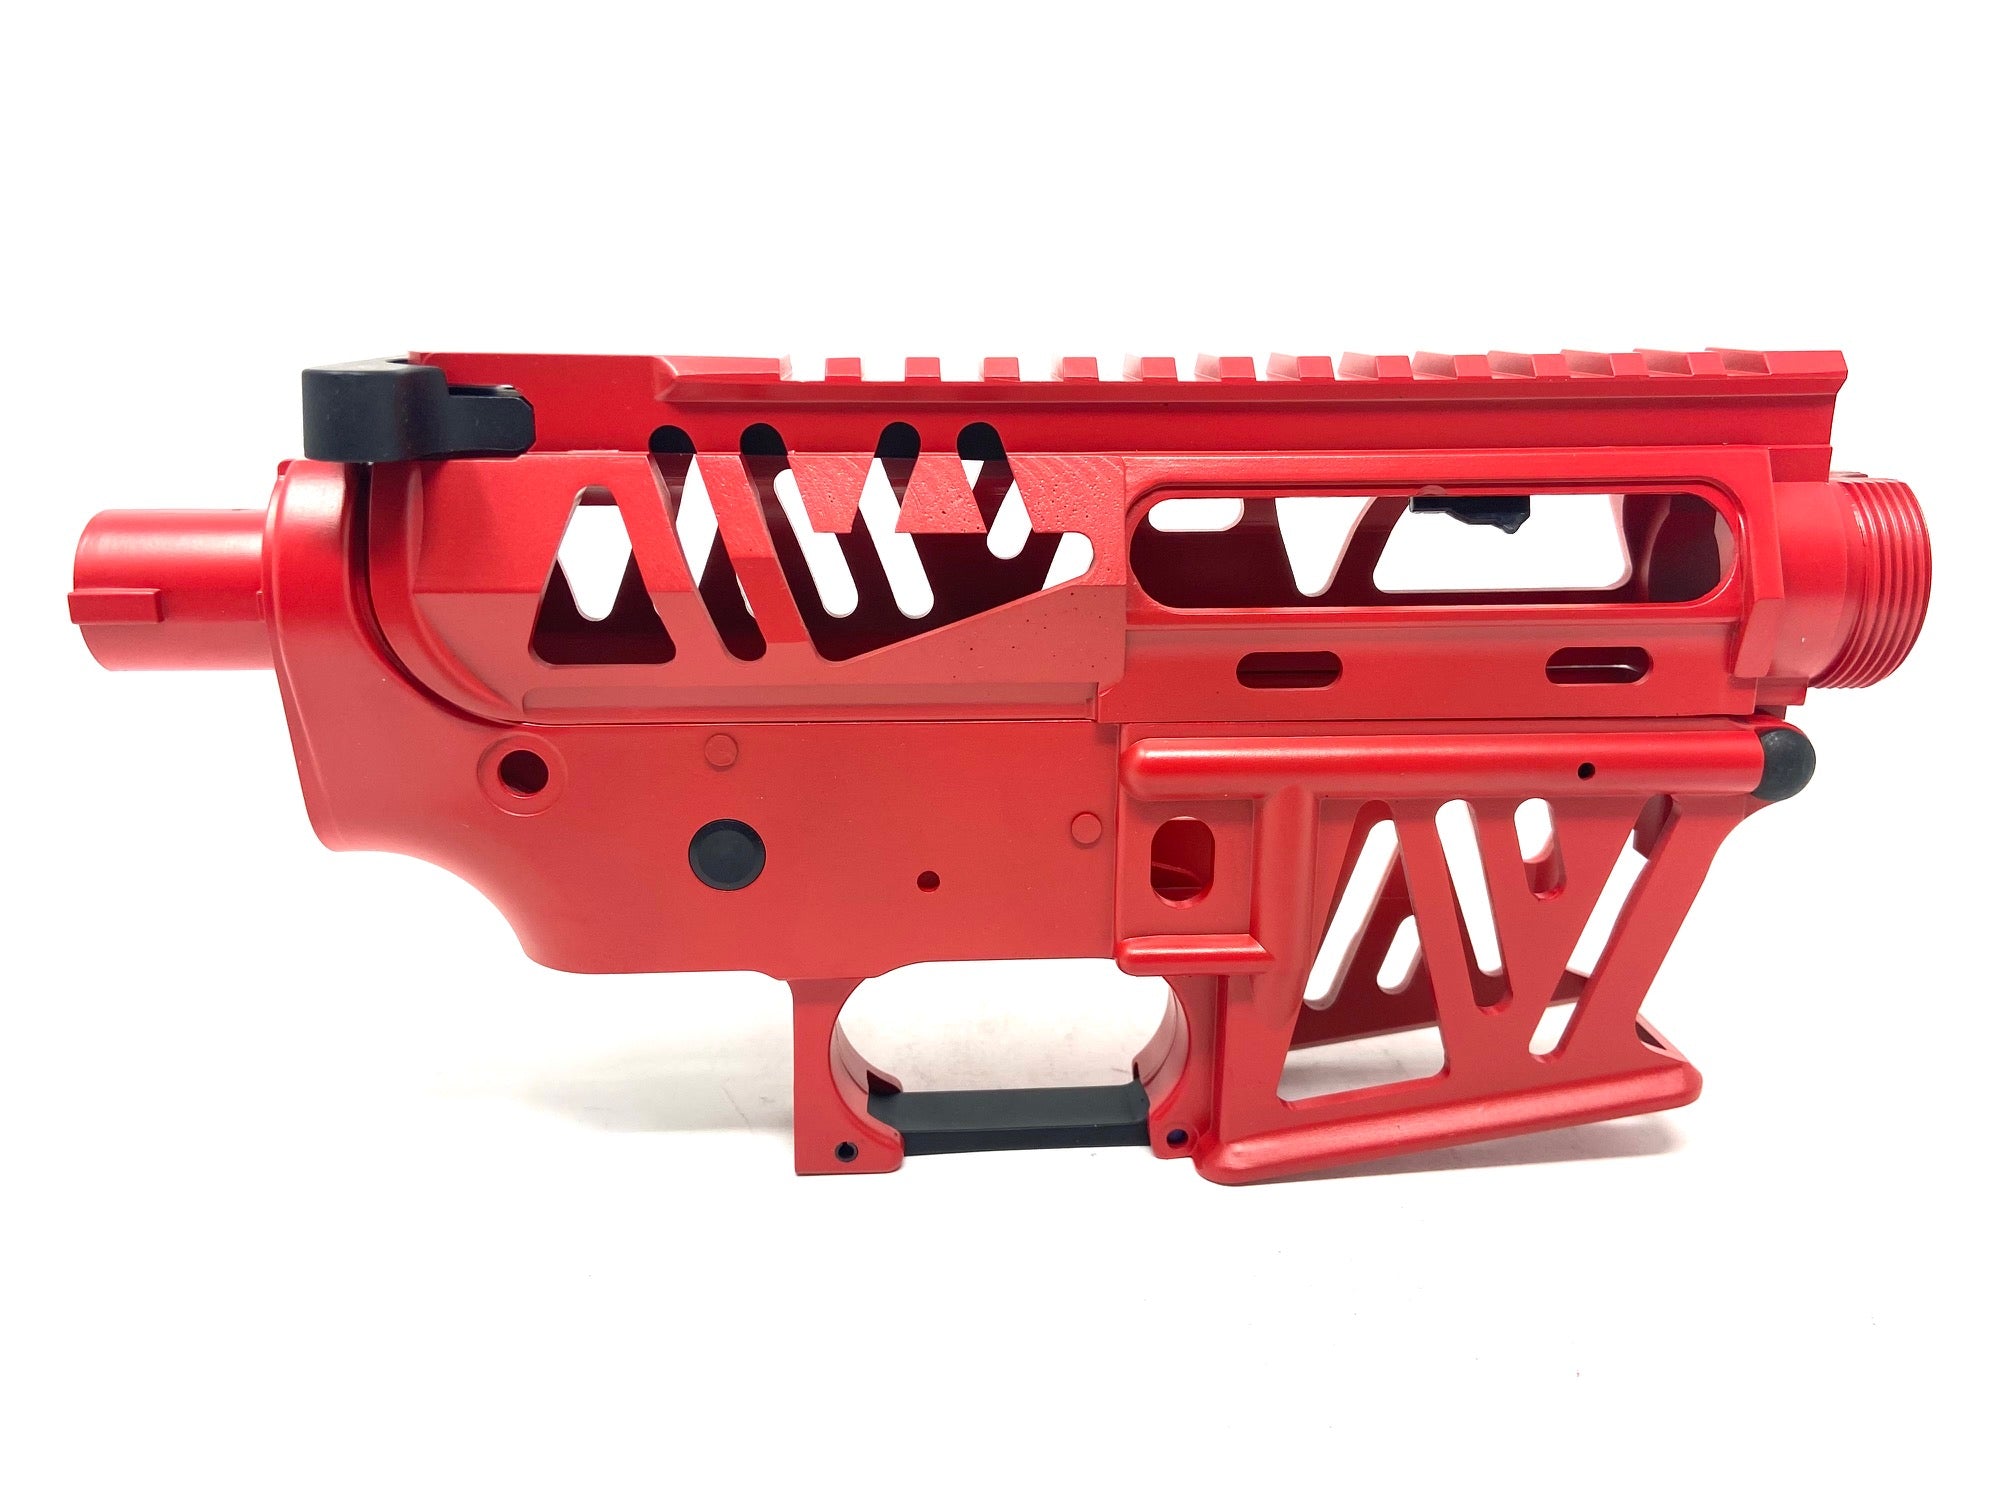 Custom M4 receiver by MAC Customs!  Available at SS Airsoft! Build your dream gun with these awesome bodies.  Includes small parts.  Fits most gearboxes.